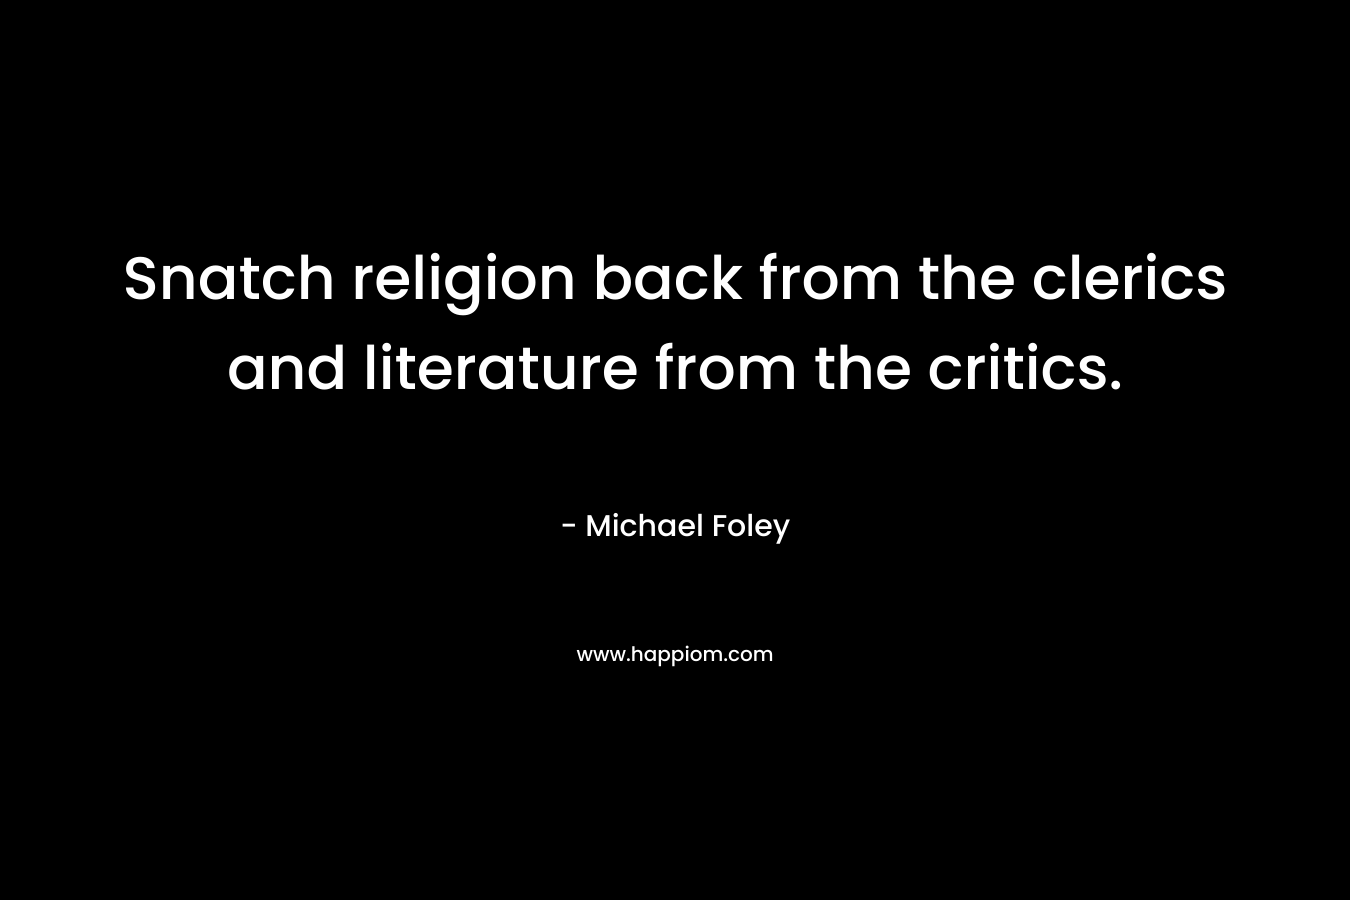 Snatch religion back from the clerics and literature from the critics. – Michael Foley